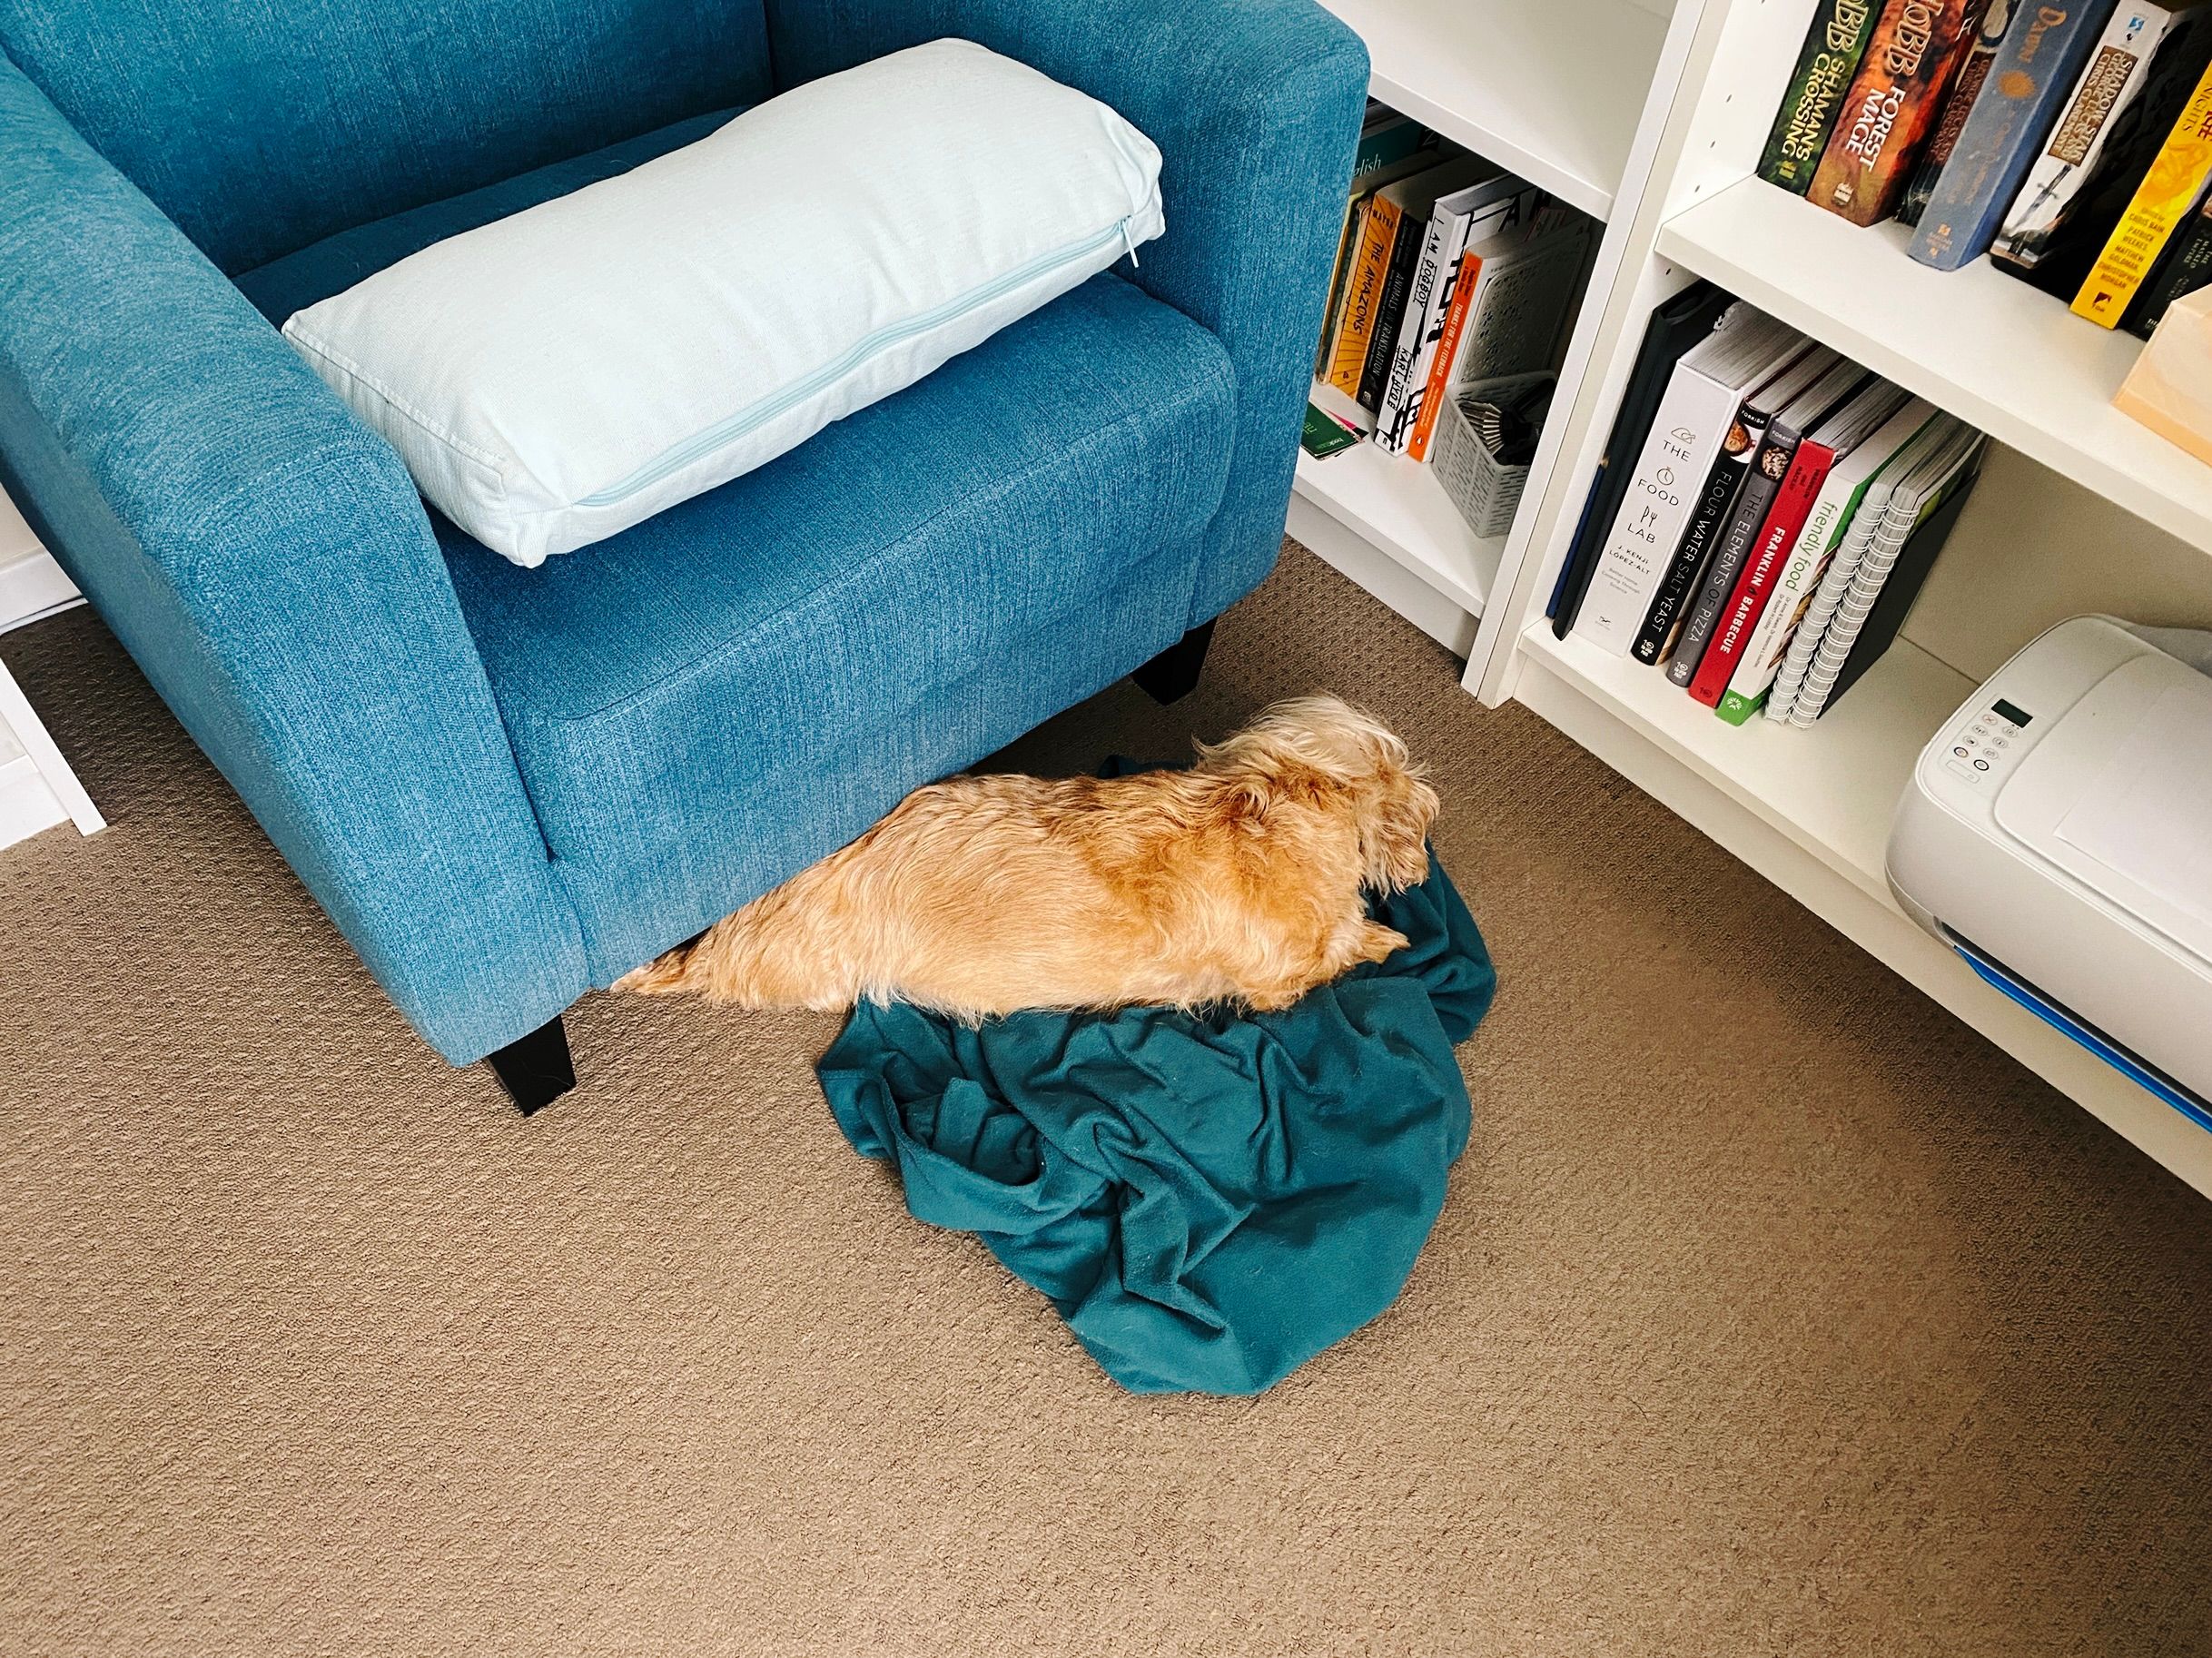 Same dog, same chair, same blanket, but he's stretched himself out but still has his back-end under the chair.